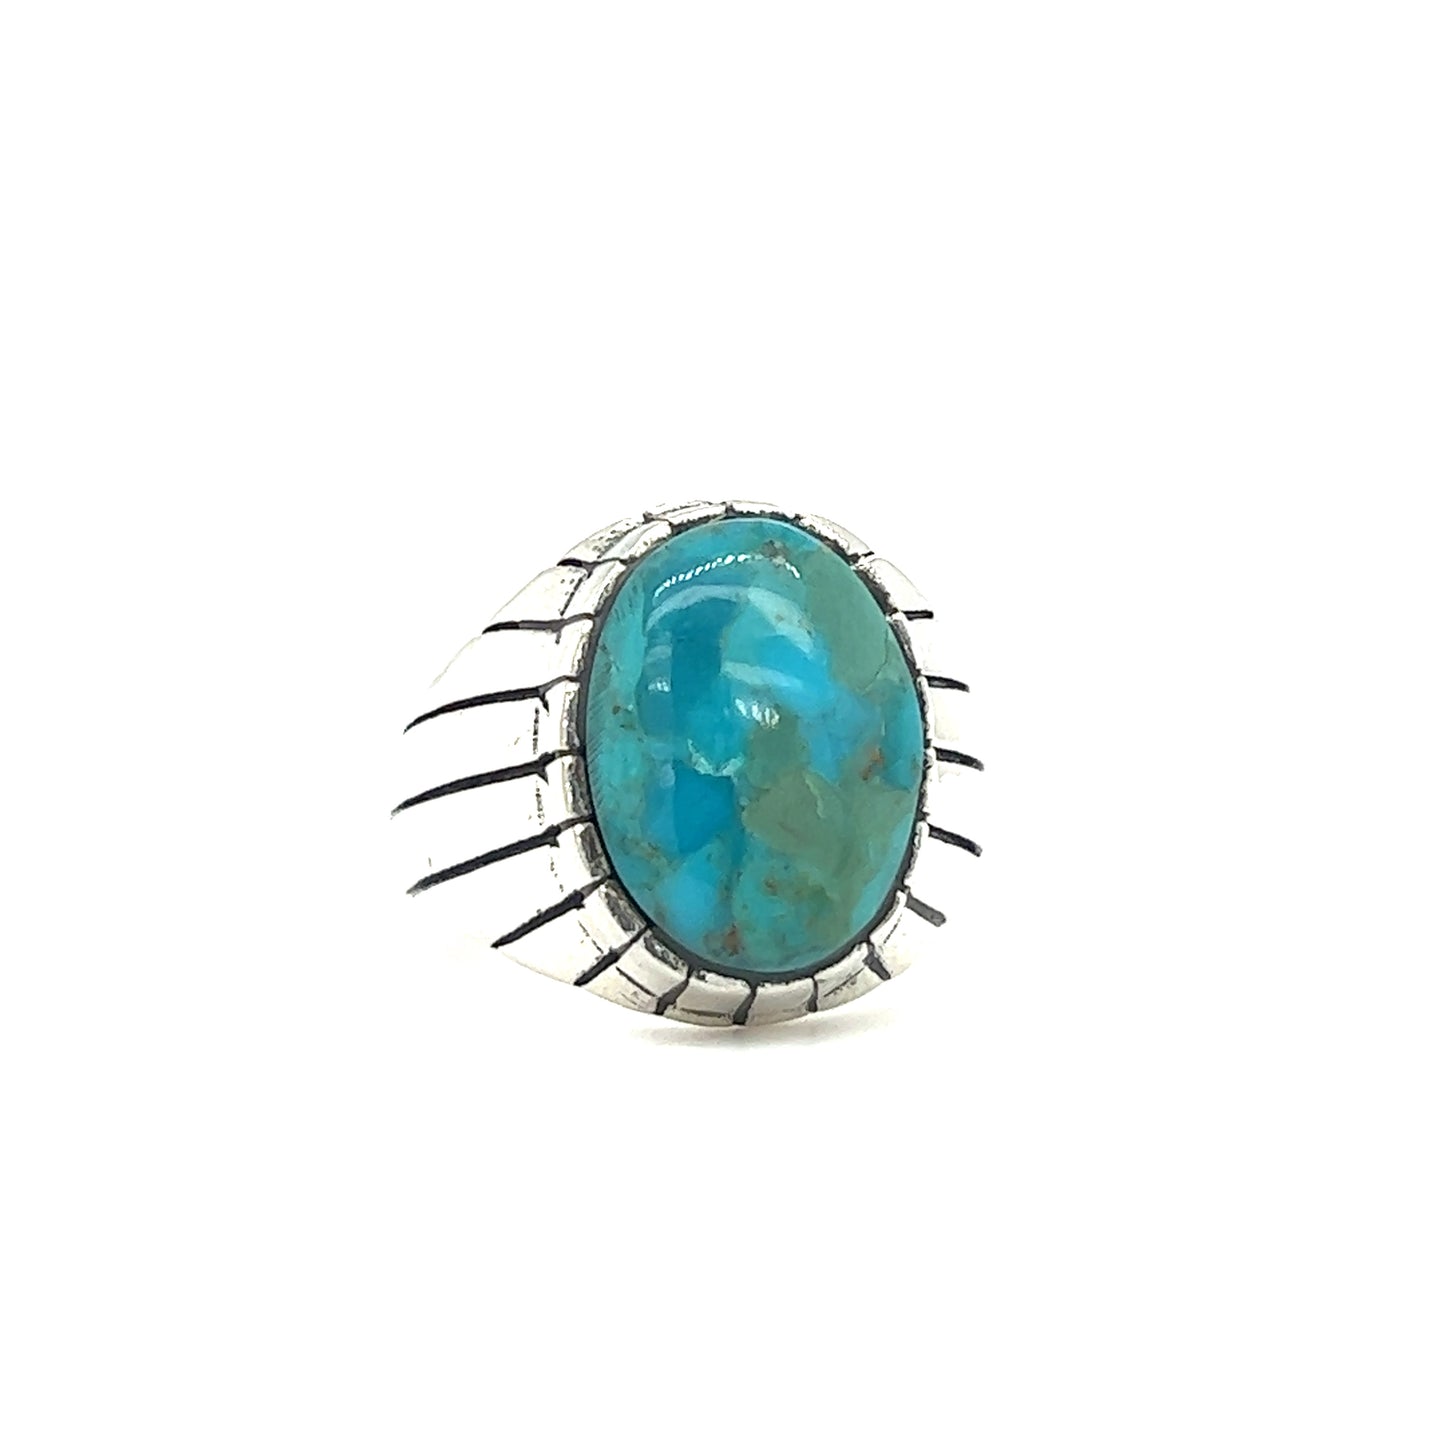 An Kingman Turquoise Oval Signet Ring on a white background from the brand Super Silver.